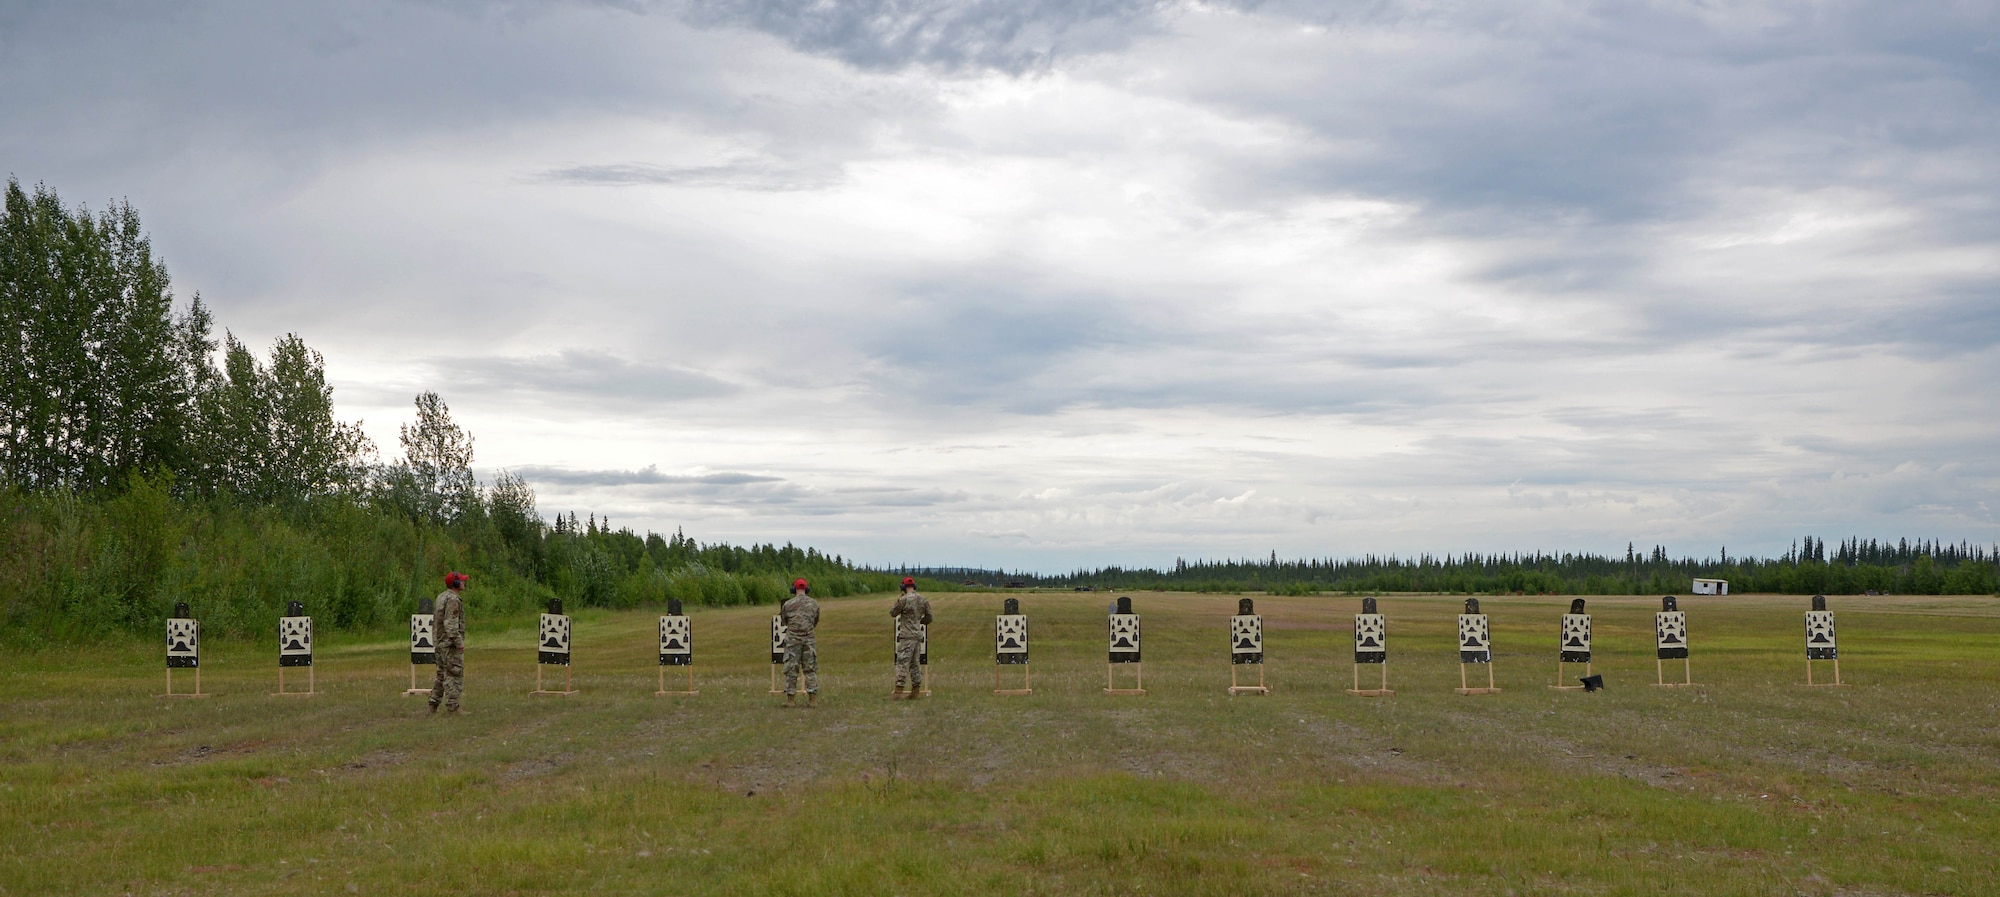 Airmen from the 354th Security Forces Combat Arms examine and score targets during a new Security Forces Qualification Course on Eielson Air Force Base, Alaska, July 14, 2021. Eielson is one of 15 installations testing the new weapons qualification course. (U.S. Air Force photo by Senior Airman Beaux Hebert)